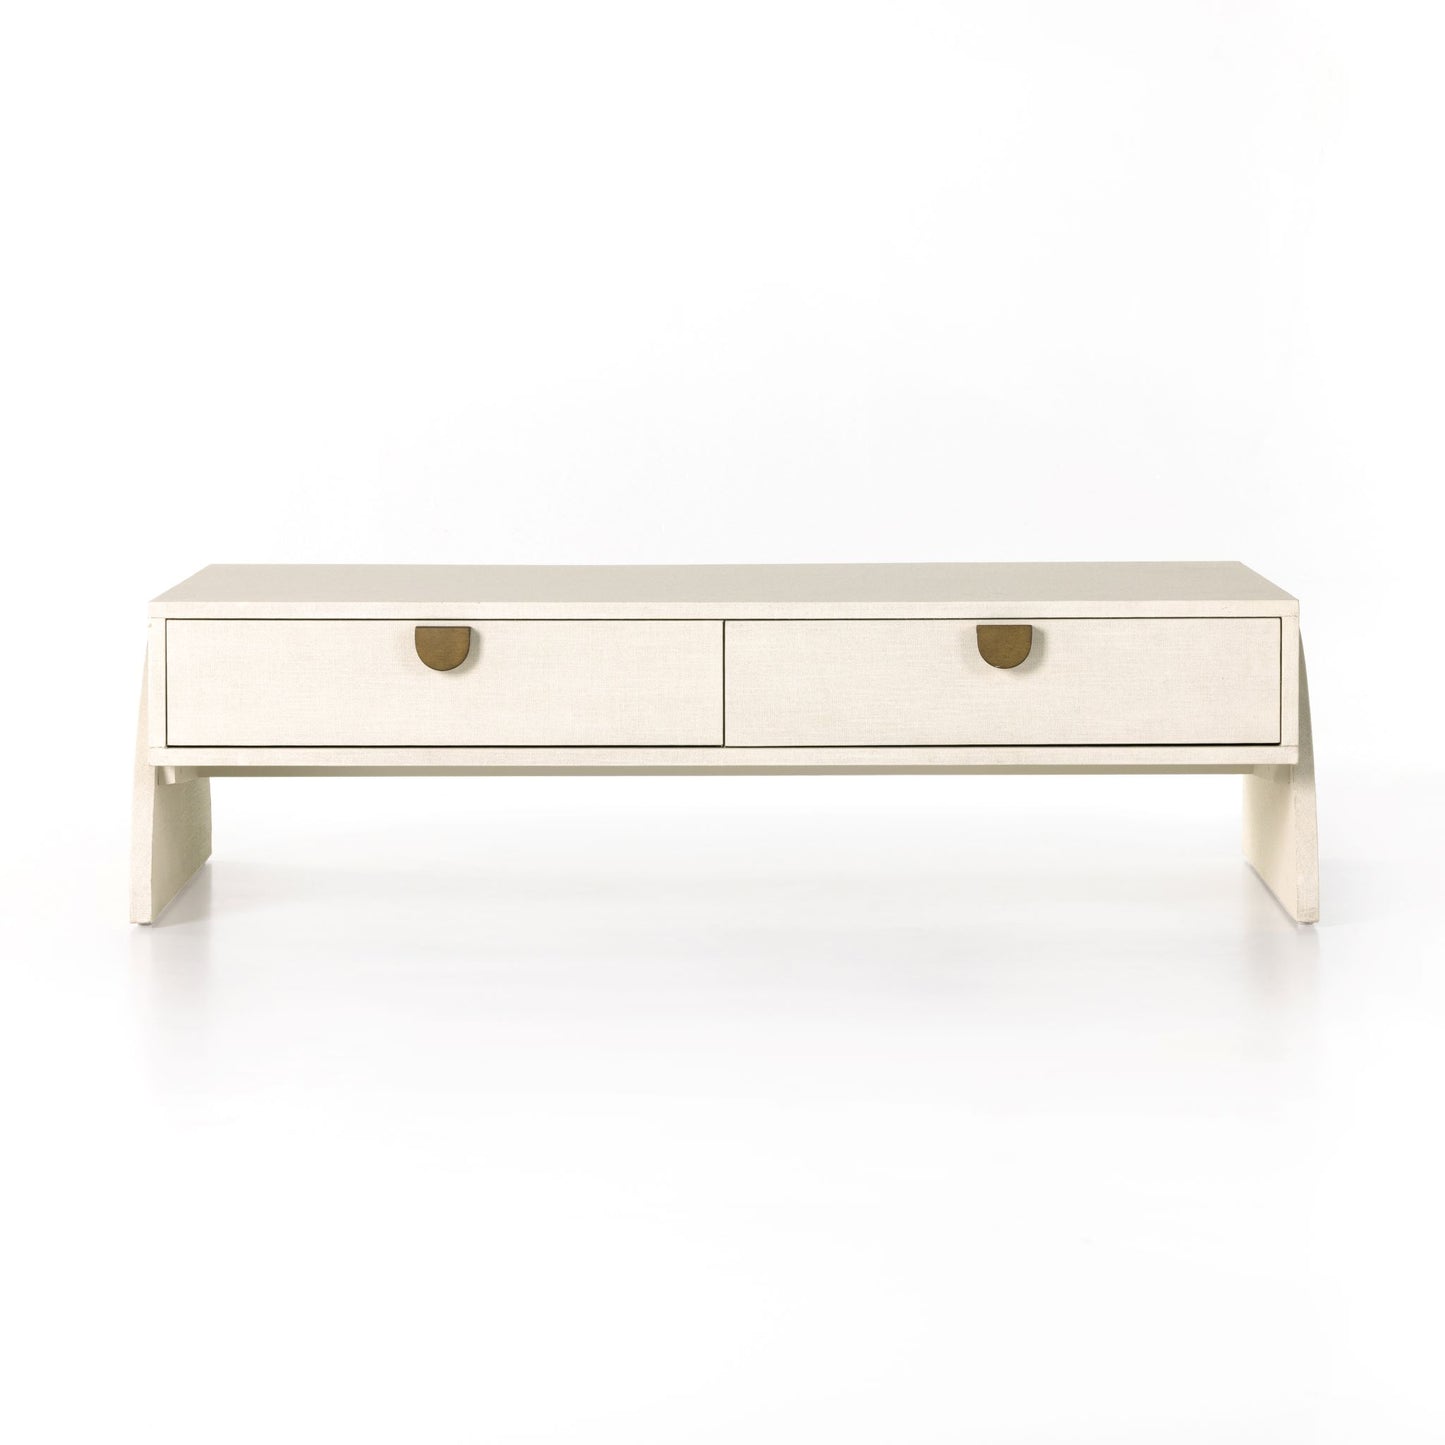 Cressida Coffee Table-Ivory Painted Linen Coffee Tables Four Hands     Four Hands, Mid Century Modern Furniture, Old Bones Furniture Company, Old Bones Co, Modern Mid Century, Designer Furniture, https://www.oldbonesco.com/